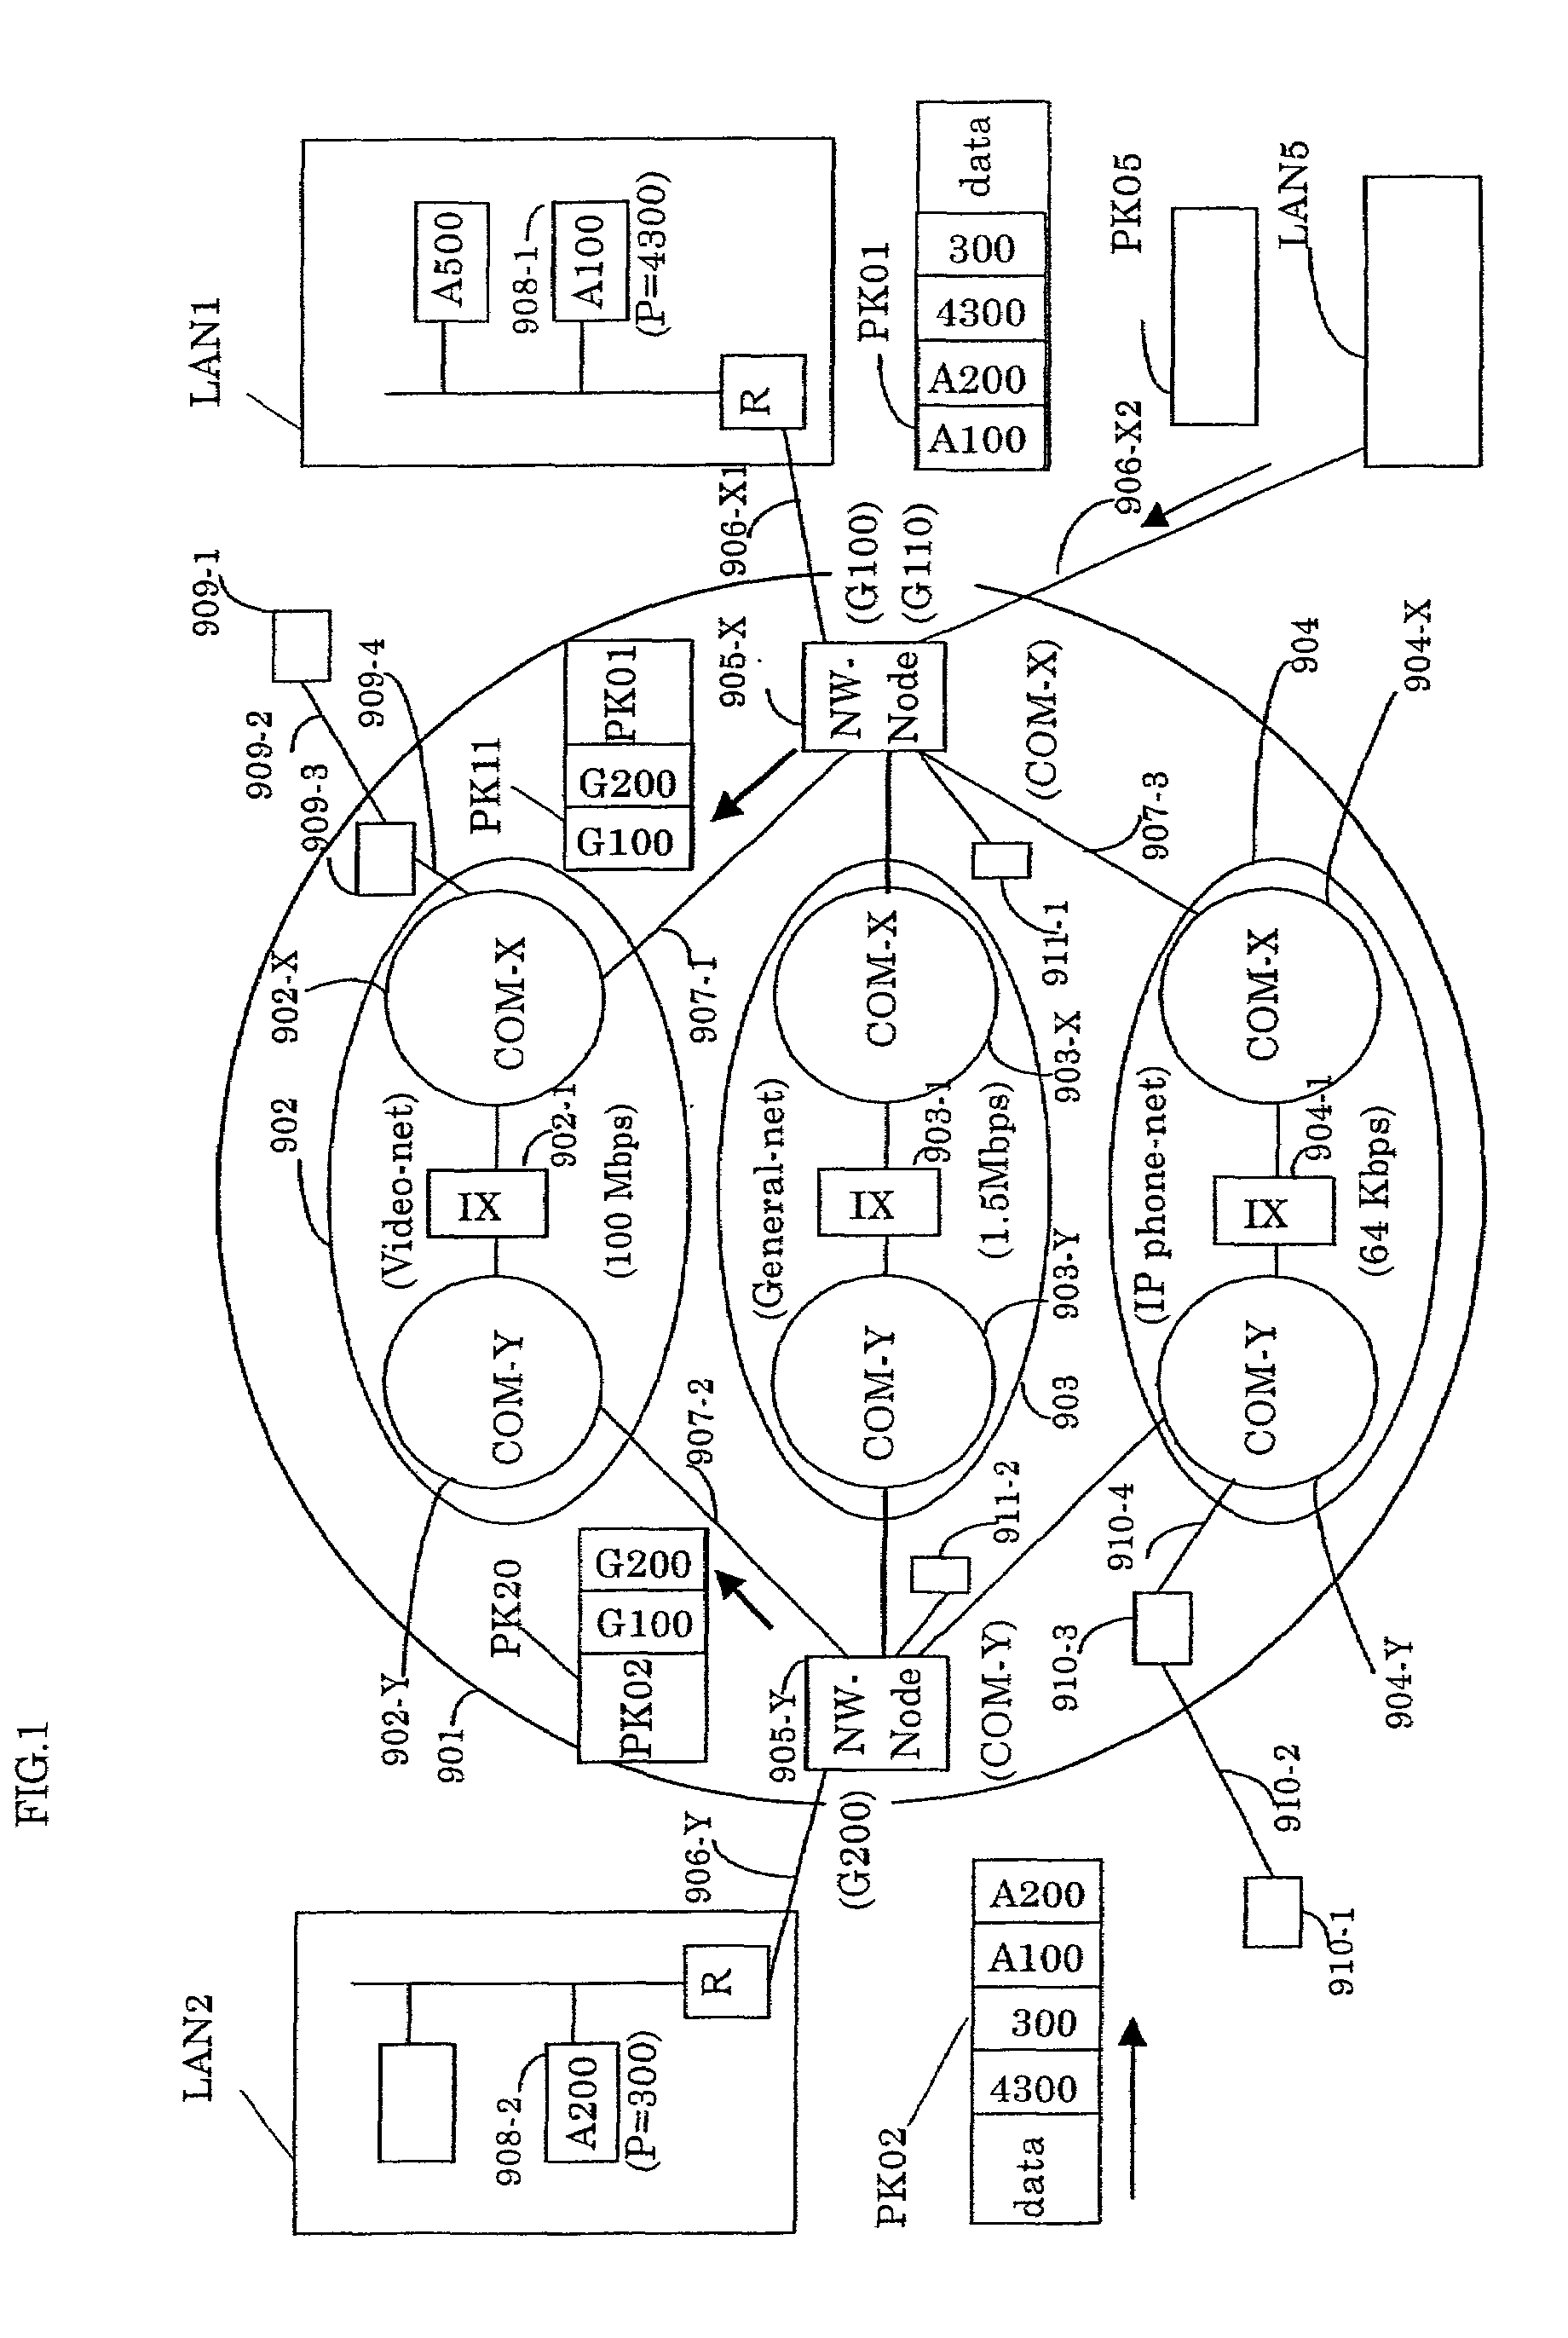 Terminal-to-terminal communication connection control method using IP transfer network